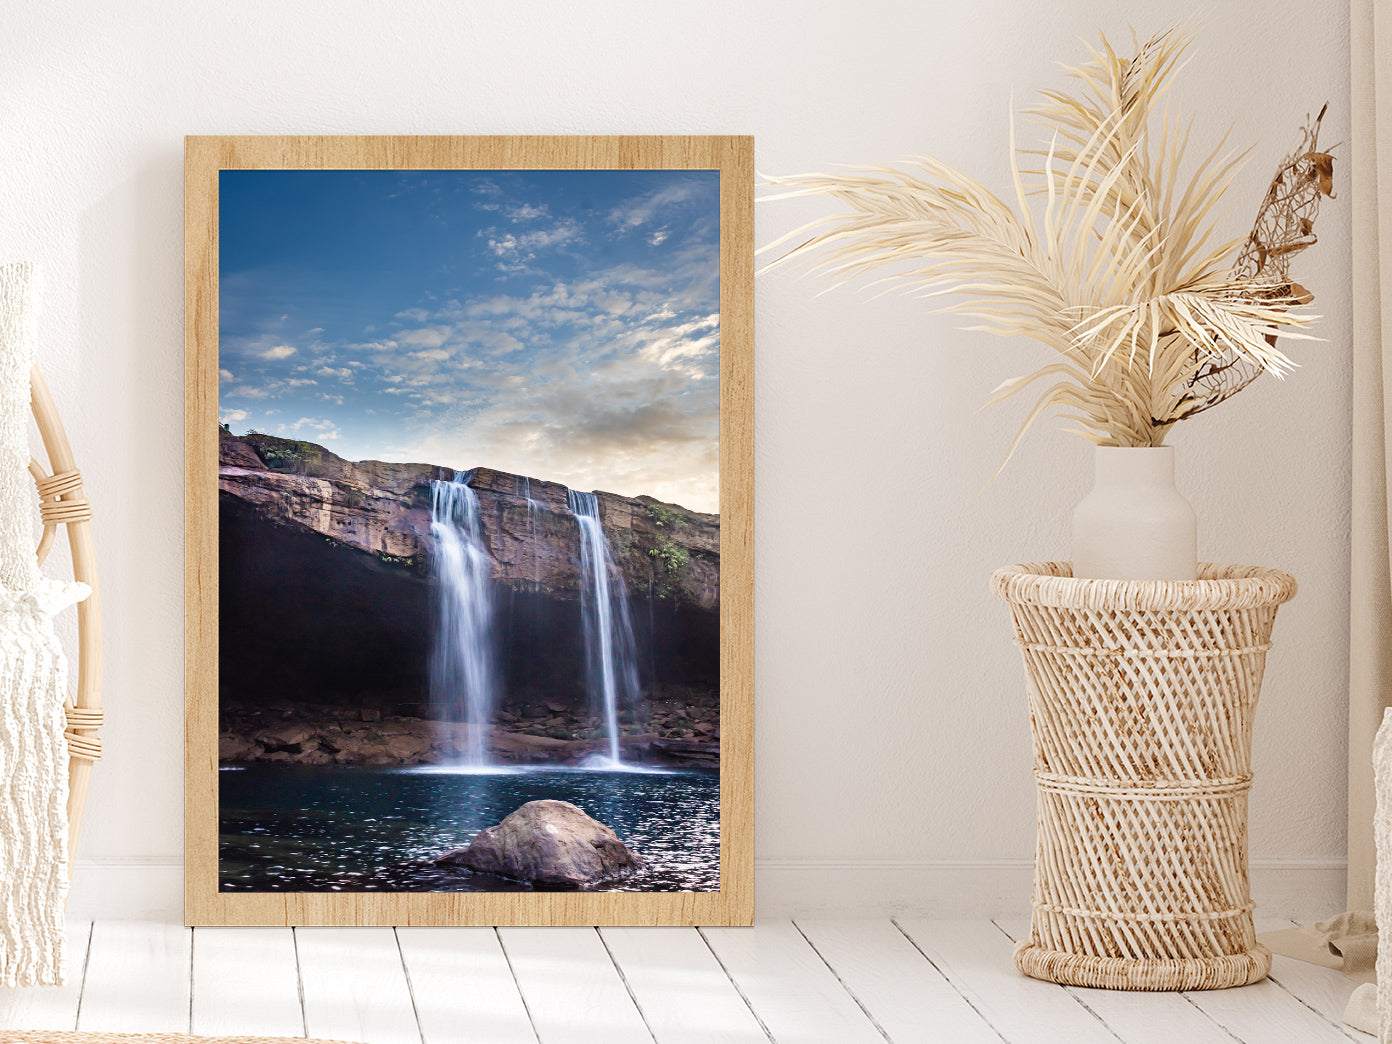 Waterfall Falling From Mountain Glass Framed Wall Art, Ready to Hang Quality Print Without White Border Oak